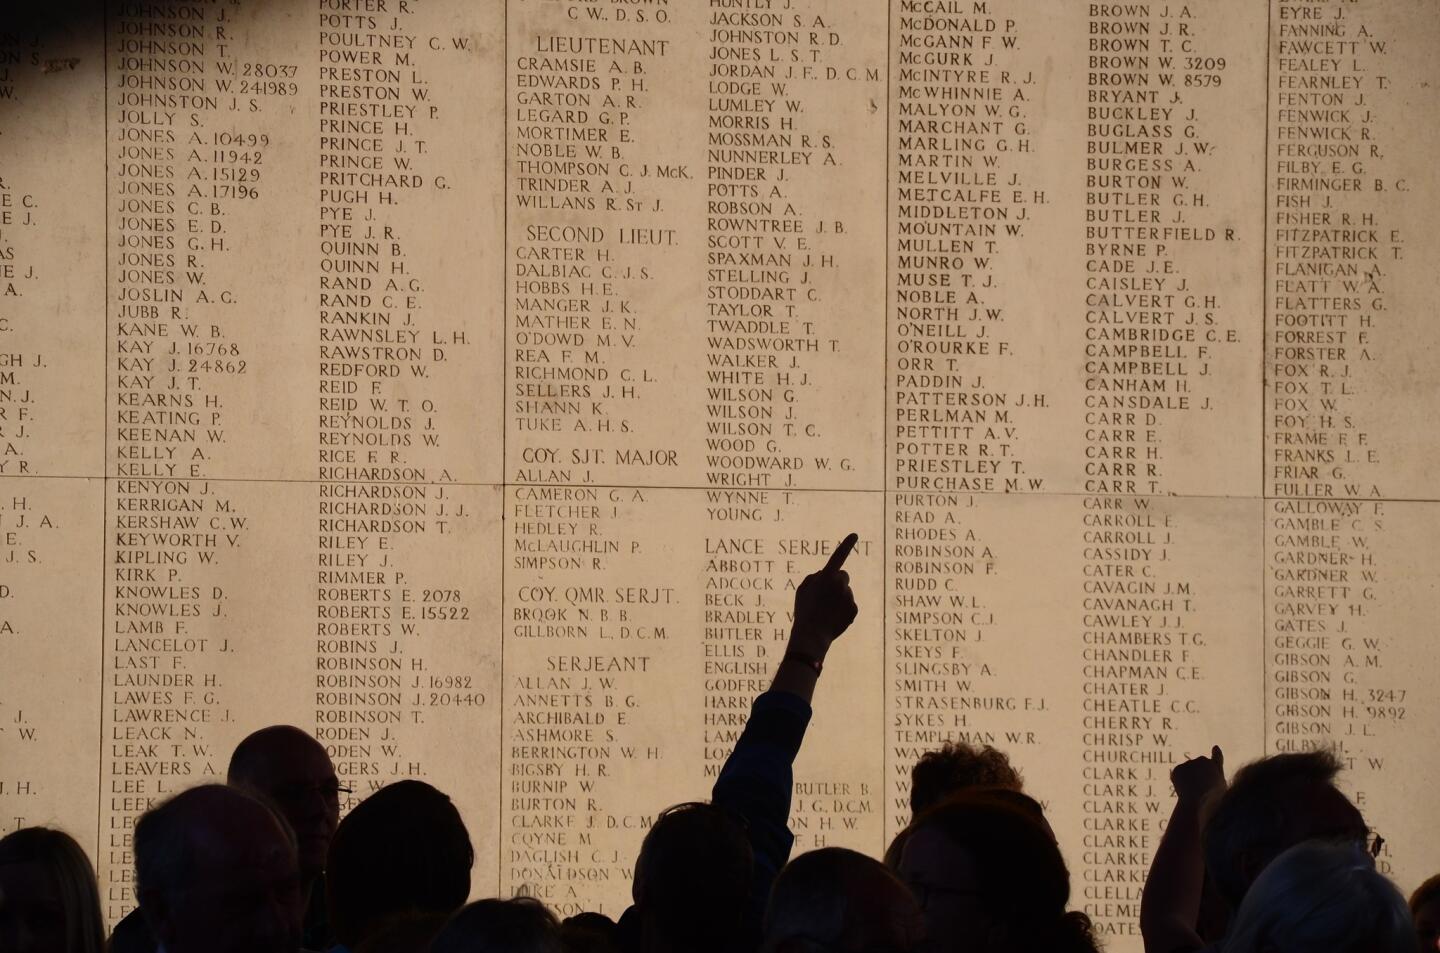 The Menin Gate honors missing soldiers from the British Commonwealth's World War I effort. Nightly it draws visitors who commemorate their sacrifice.